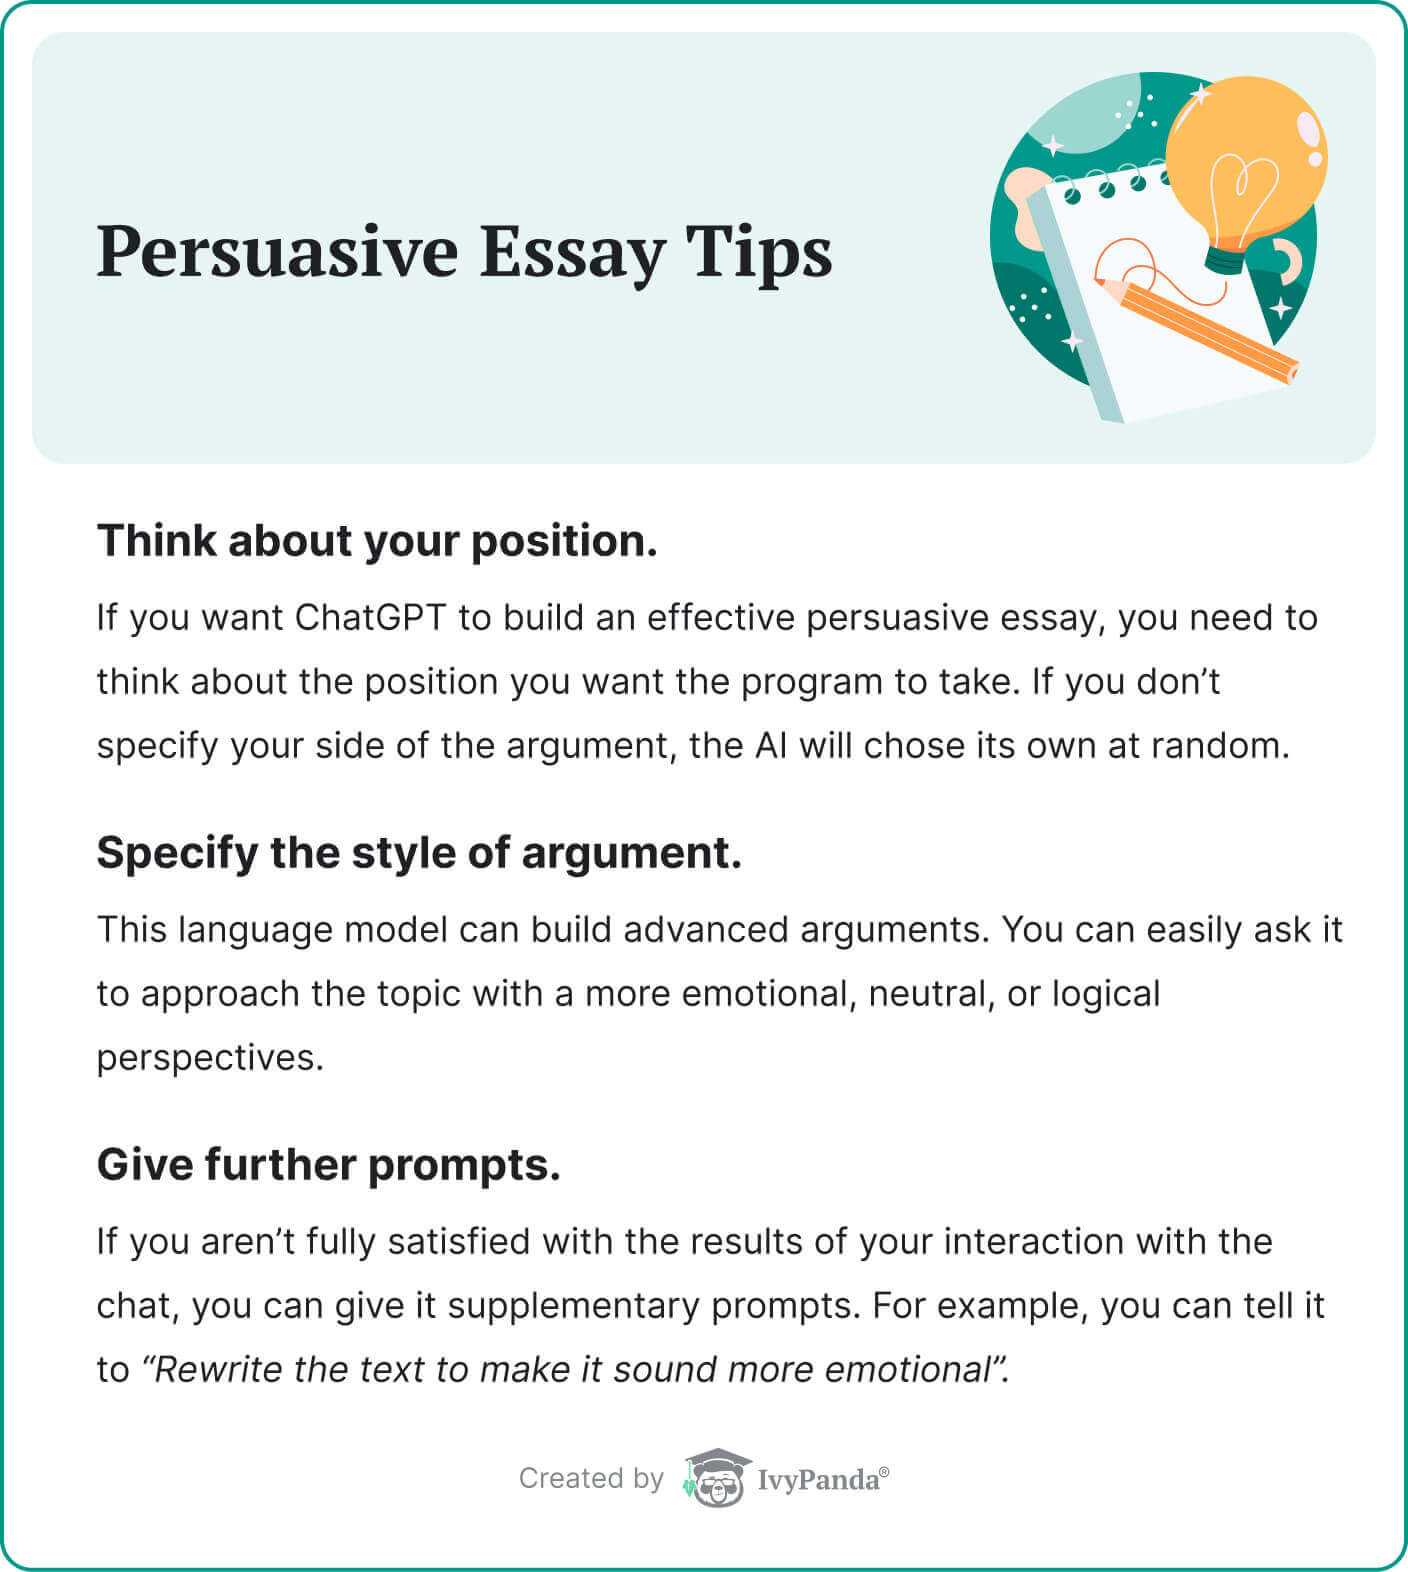 Tips for generating persuasive essays in ChatGPT.